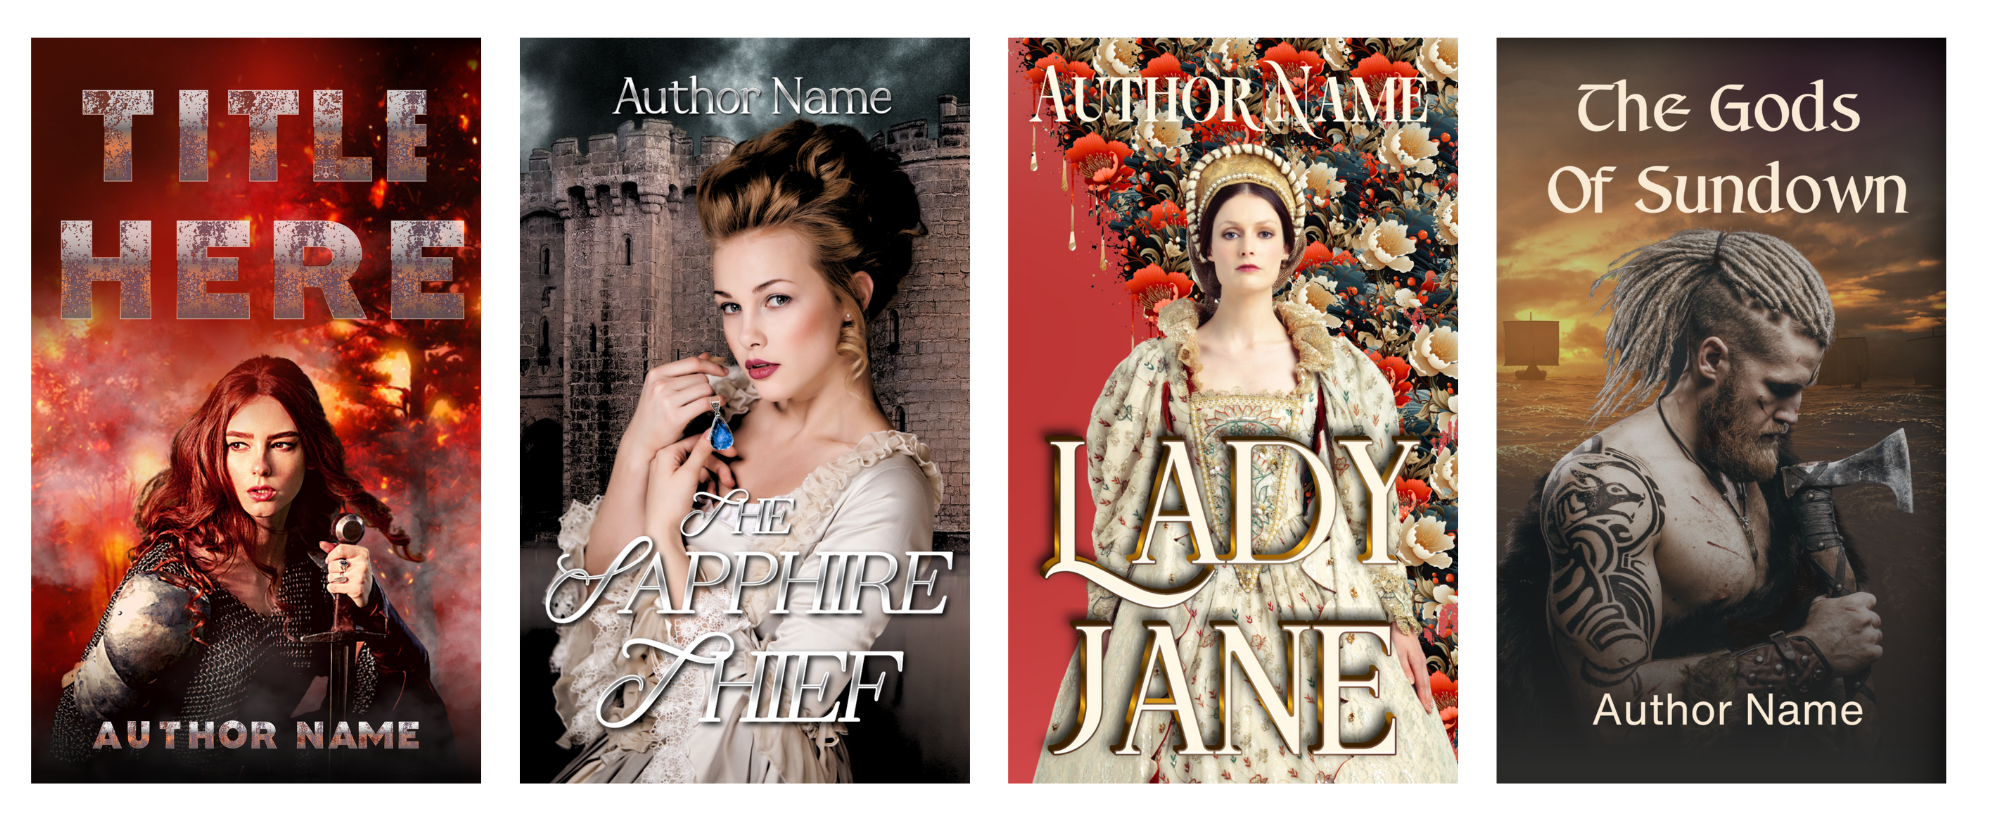 A collection of four book covers. The first features a woman with a gun in a fiery background. The second shows a woman in a white dress with a castle backdrop, titled "The Sapphire Thief." The third depicts a regal woman in an elaborate dress, titled "Lady Jane." The fourth shows a muscular man with long hair wielding an axe, titled "The Gods of Sundown. BookSelf Book Cover Design & Premade Book Covers